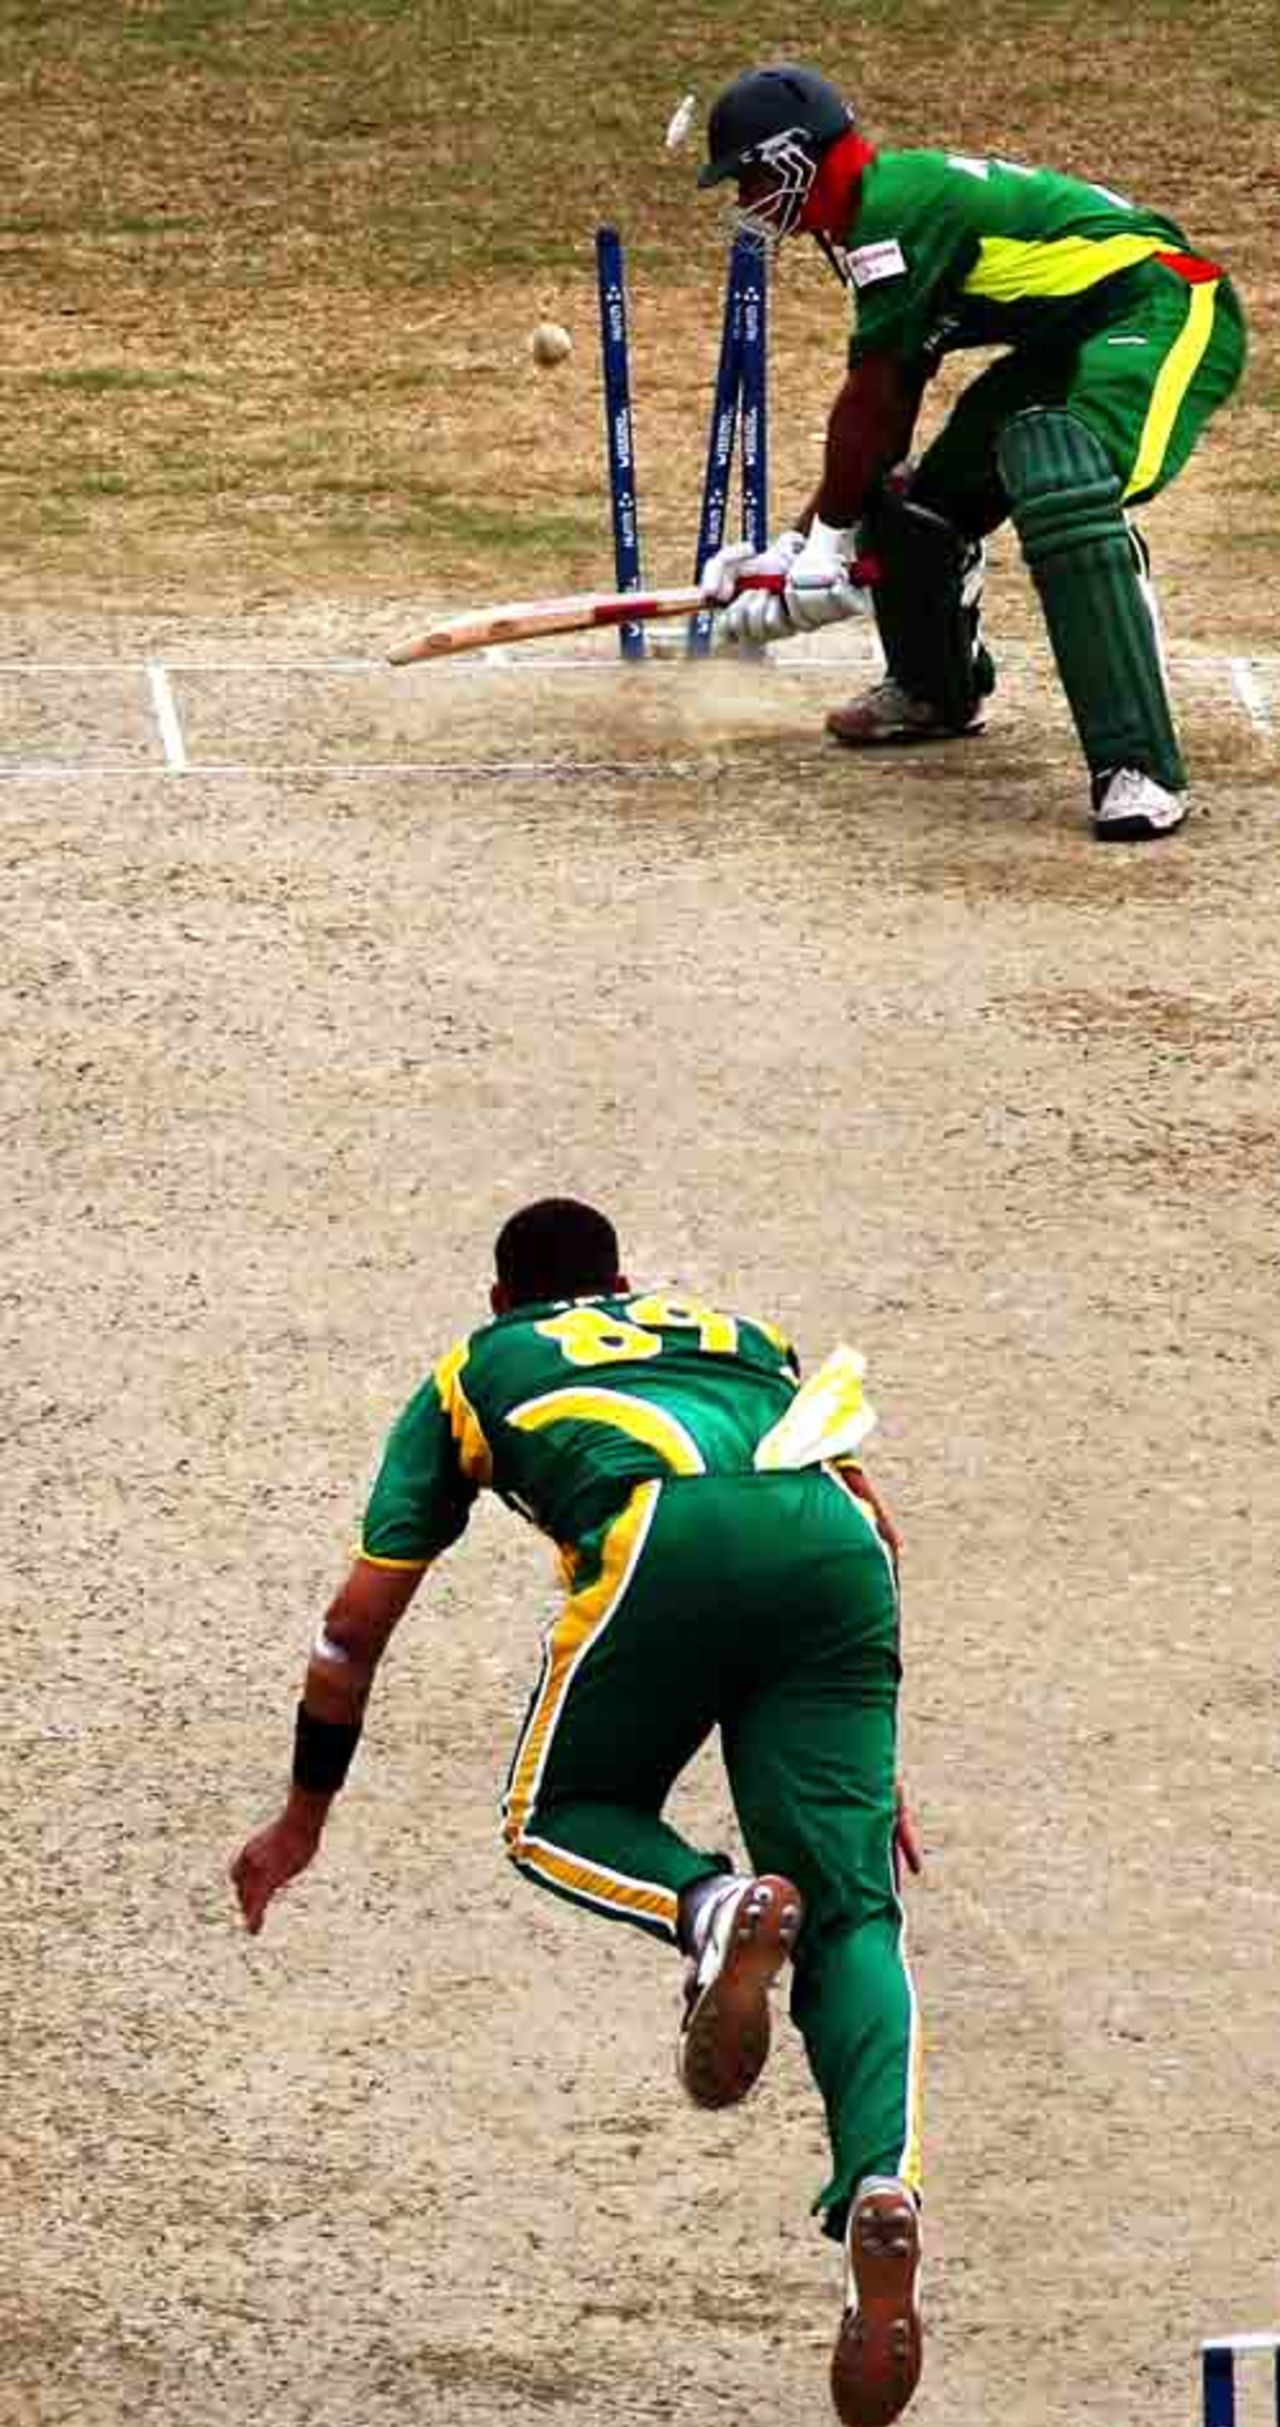 Mashrafe Mortaza gives himself a bit too mych room and is cleaned up by Andre Nel, Bangladesh vs South Africa, Super Eights, Guyana, April 7, 2007